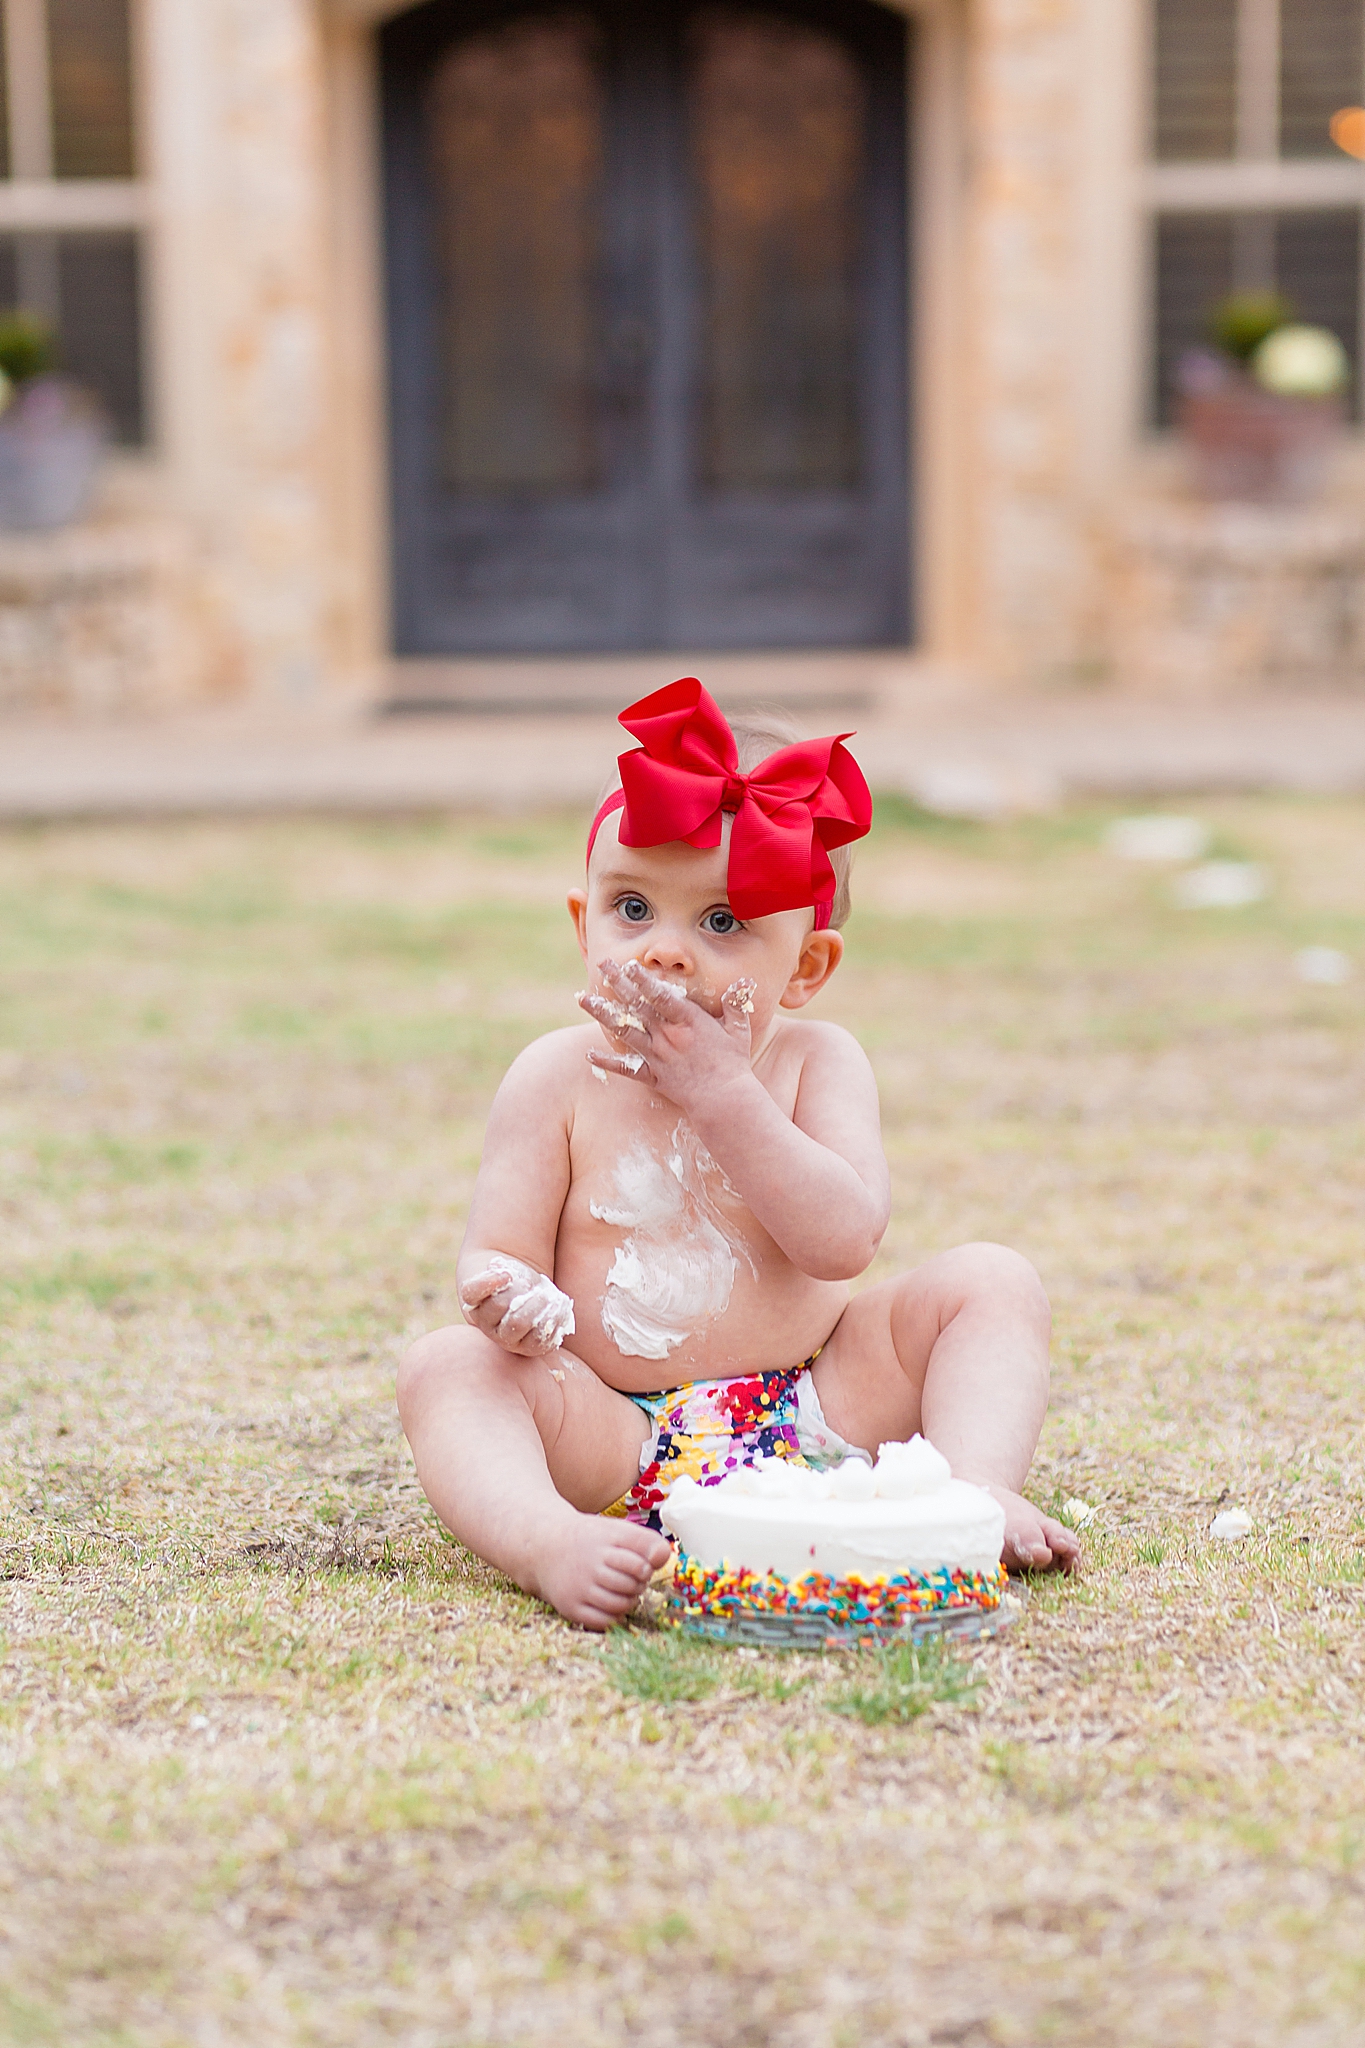 McKinney family photographer captures 1 year old smash cake session in the spring at Adriatica Village in McKinney, TX